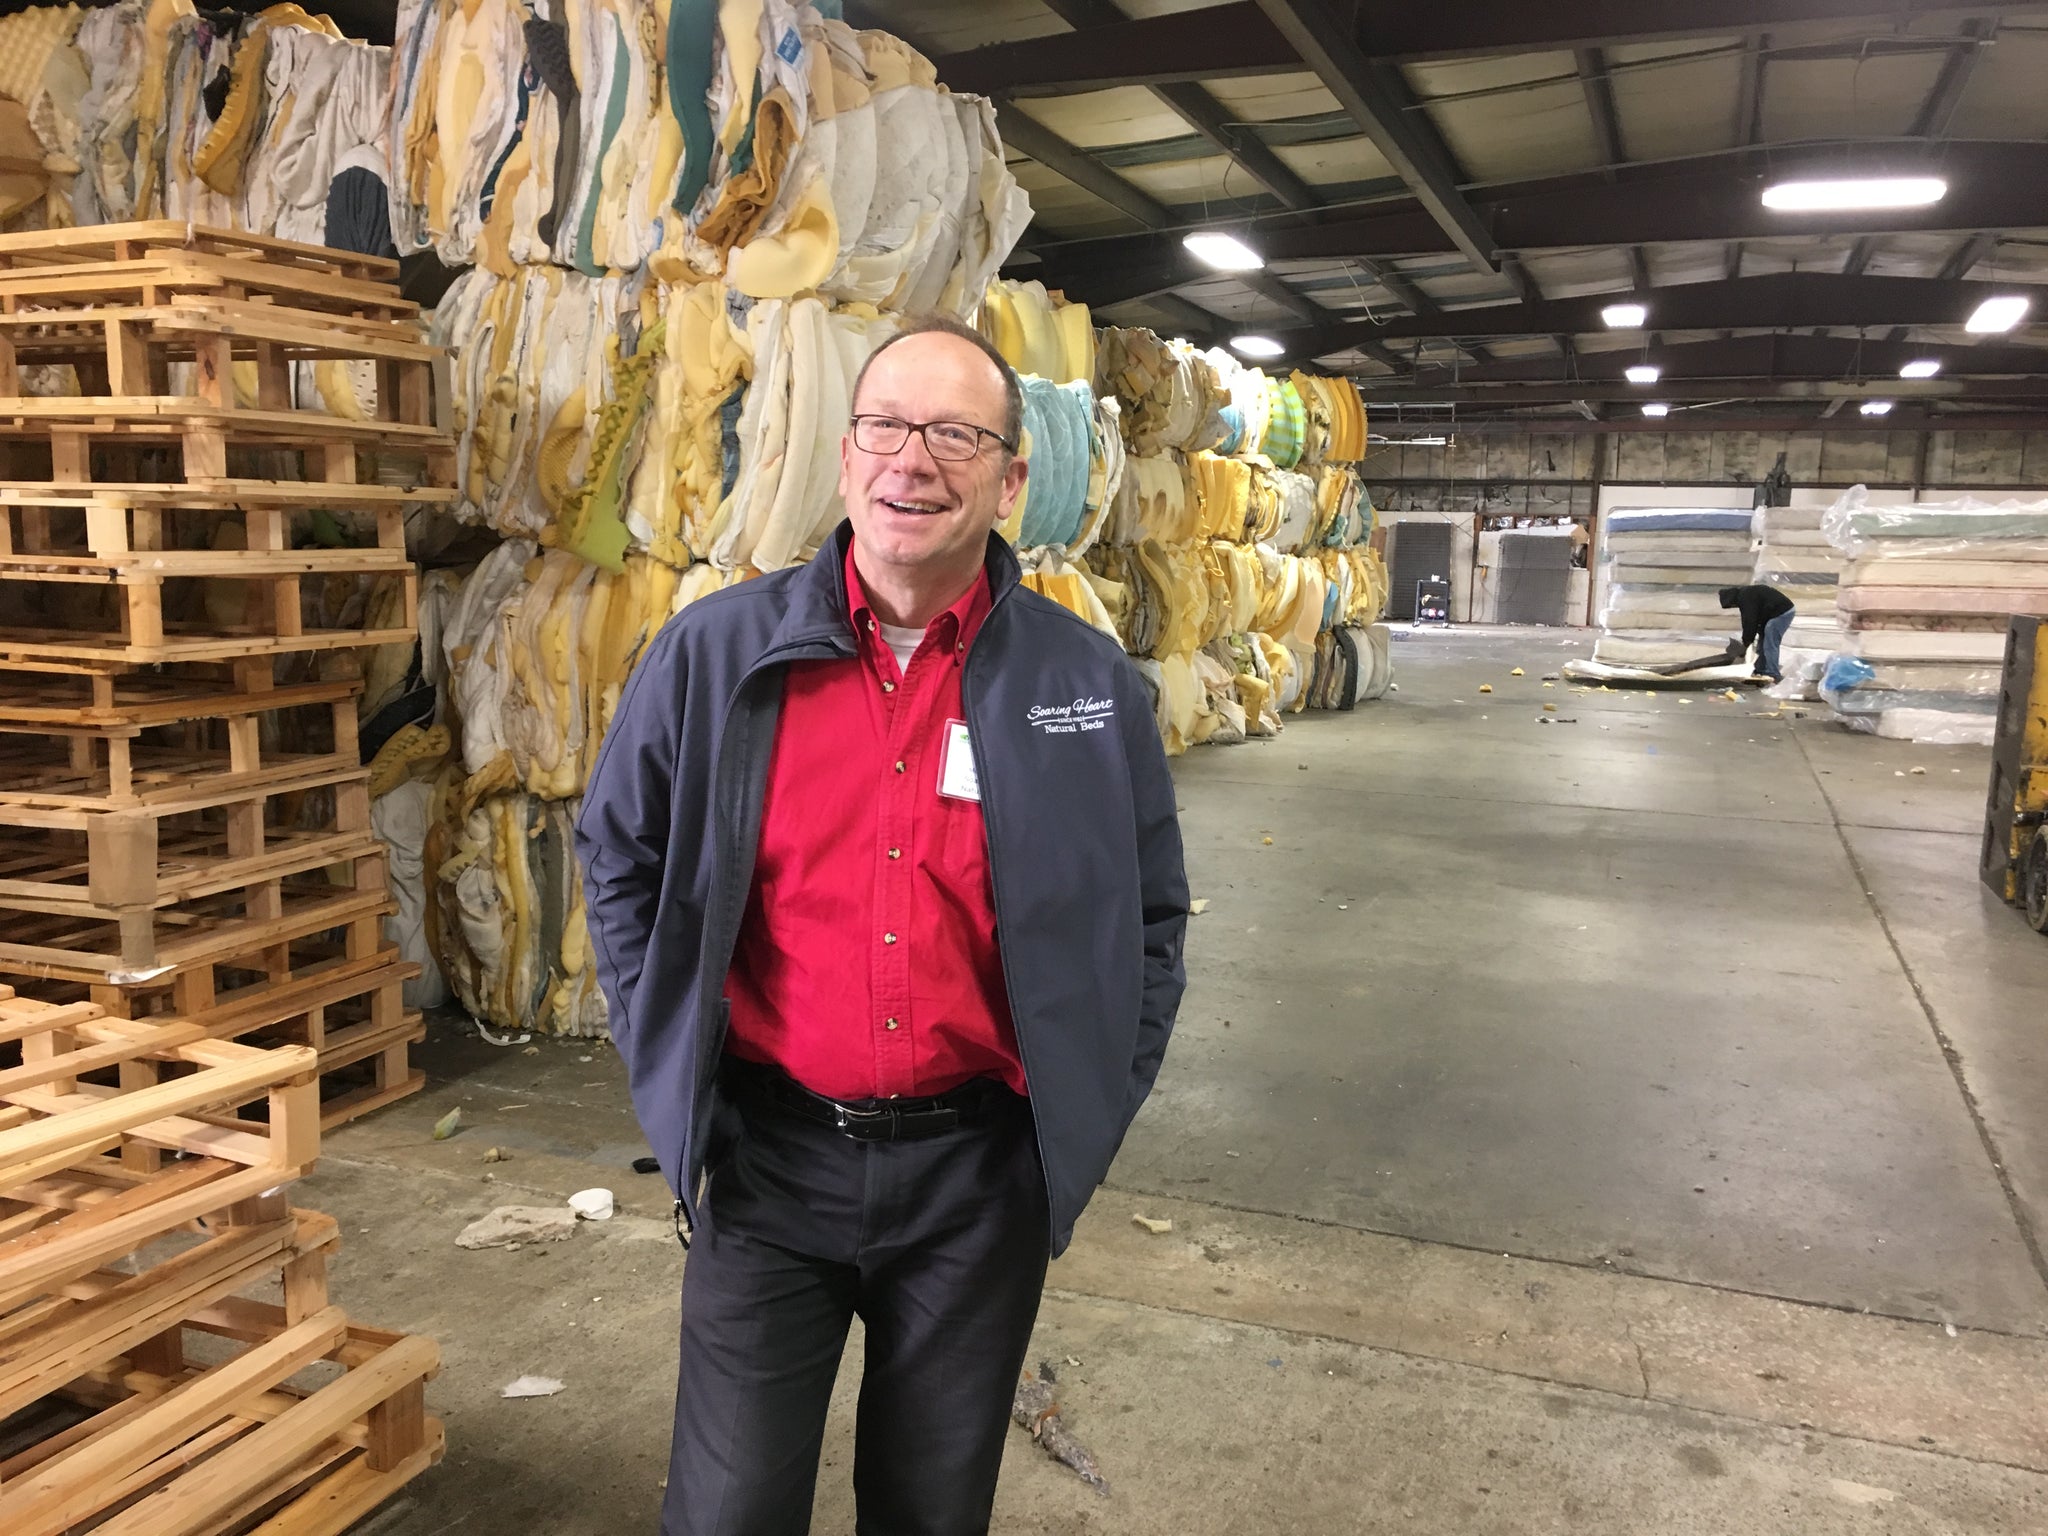 Recycling mattresses is a big business these days - super informative to see what our friends at NW Furniture bank are accomplishing